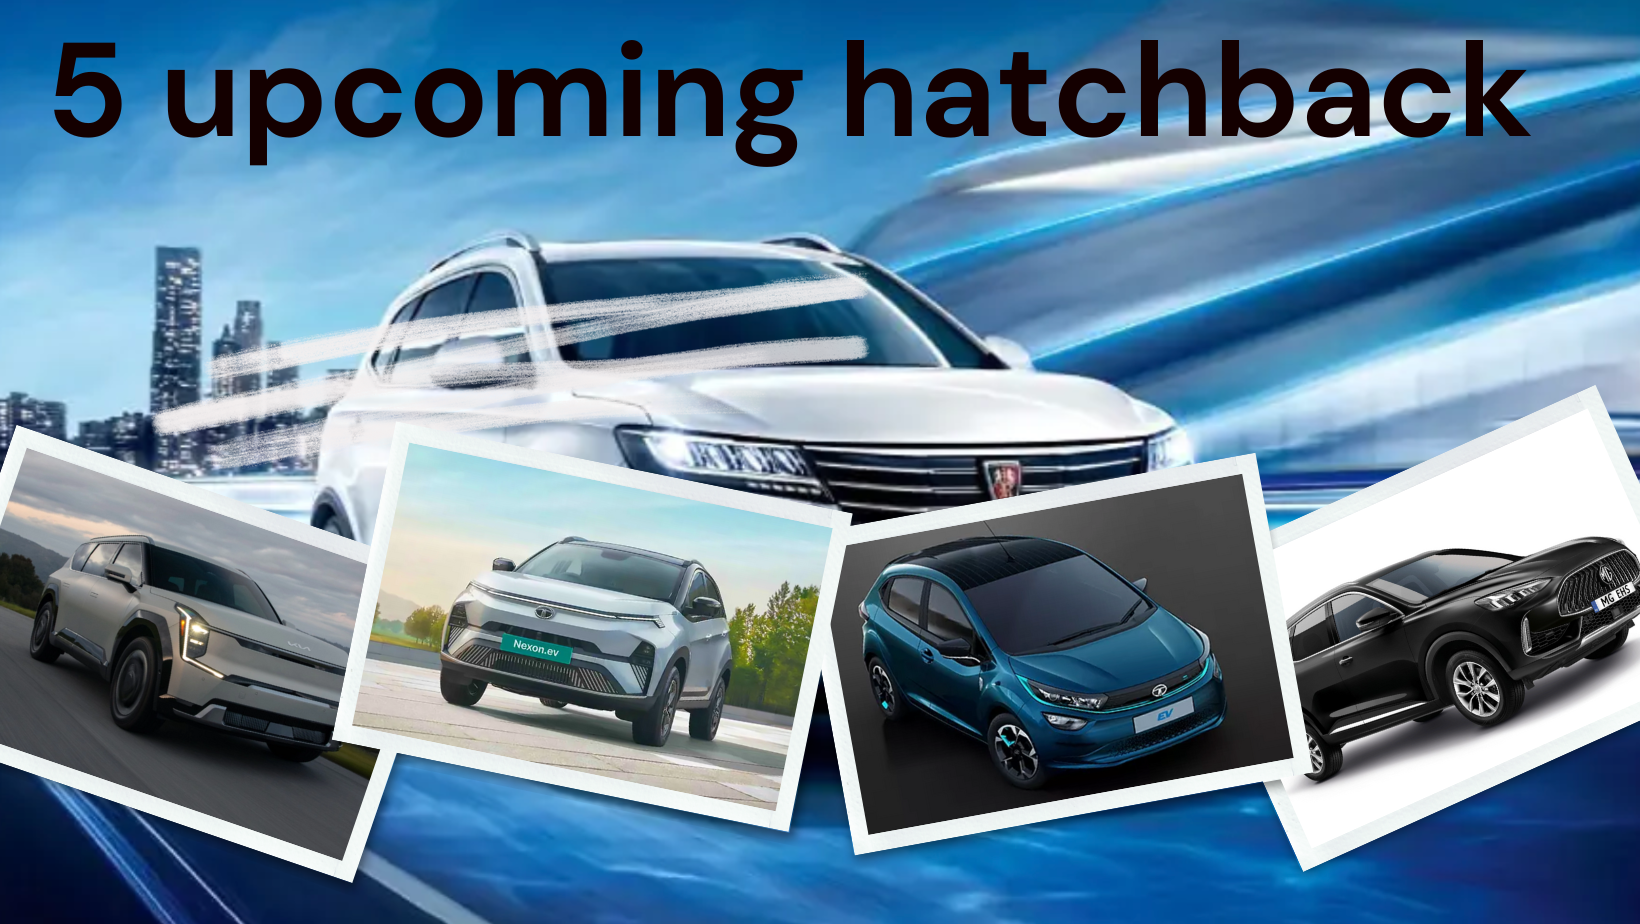 5 Upcoming hatchback in India